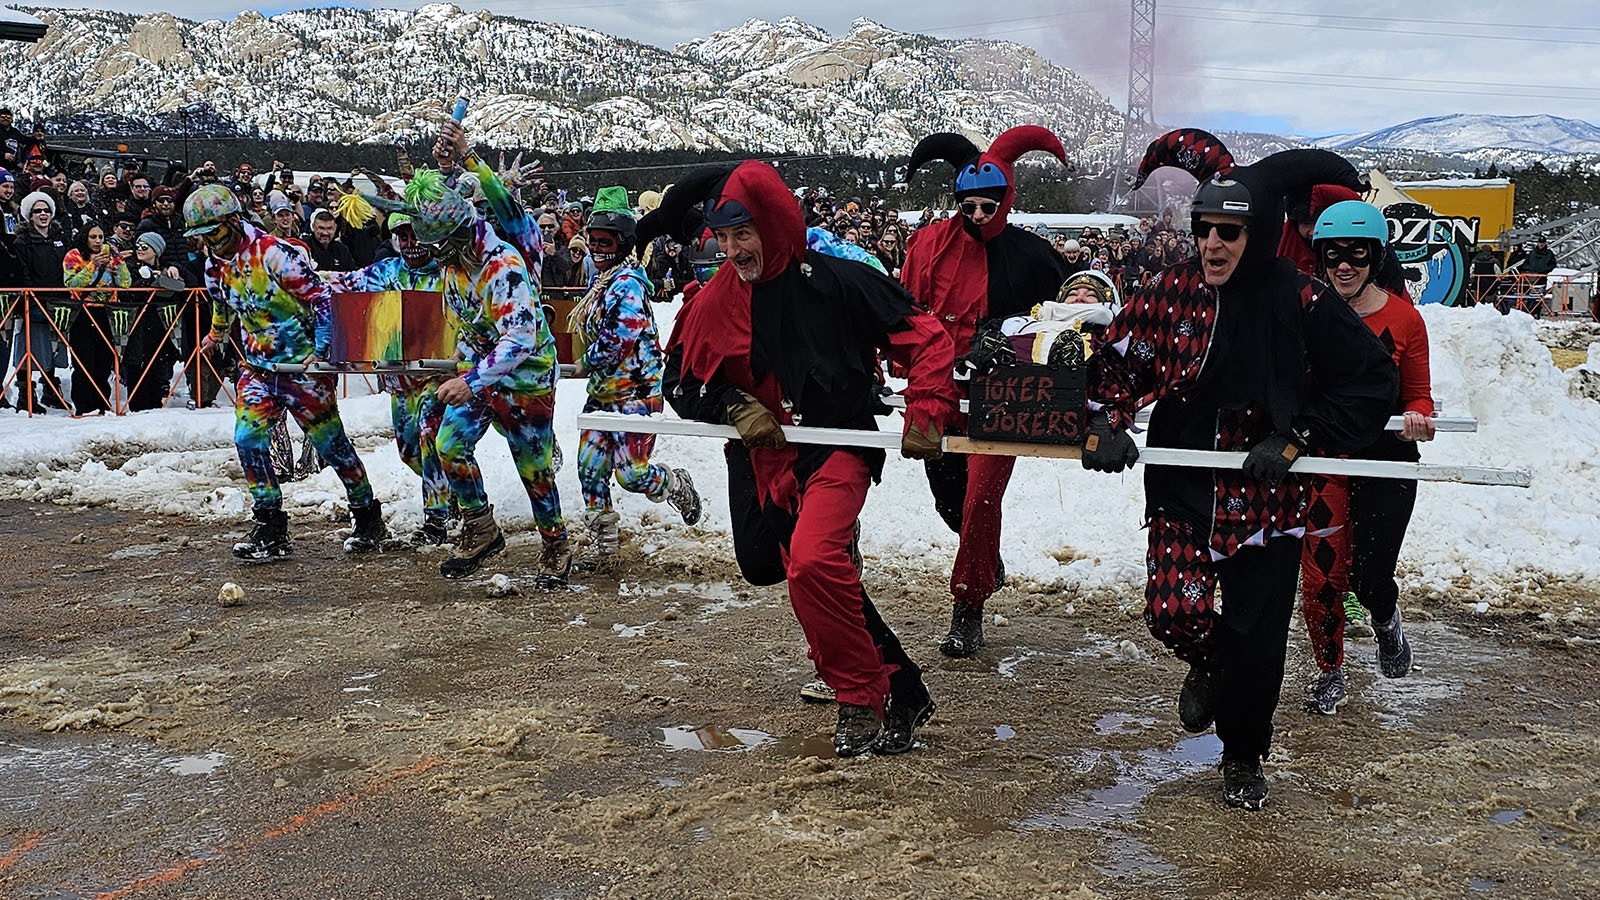 The Joker Tokens pull ahead of the Dead Heads during the Frozen Dead Guy Days Coffin Races.